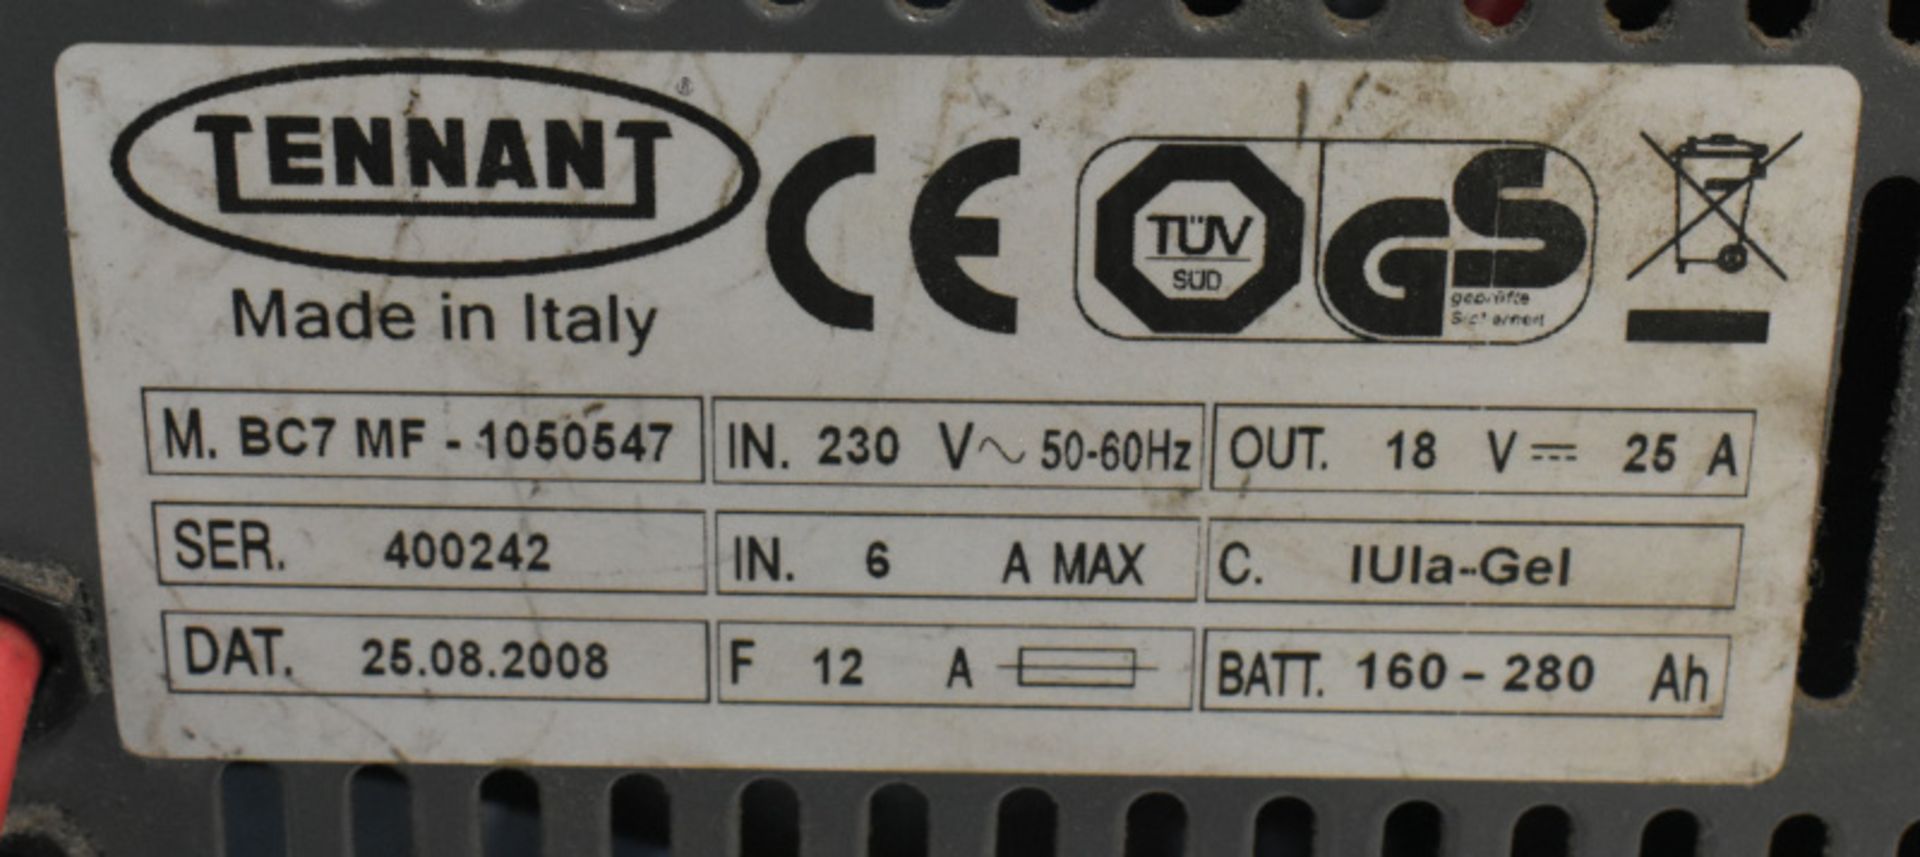 Tennant Challenger Nippy 500 and Tennant BC7 Charger, comes with key, starts and runs - Image 7 of 7